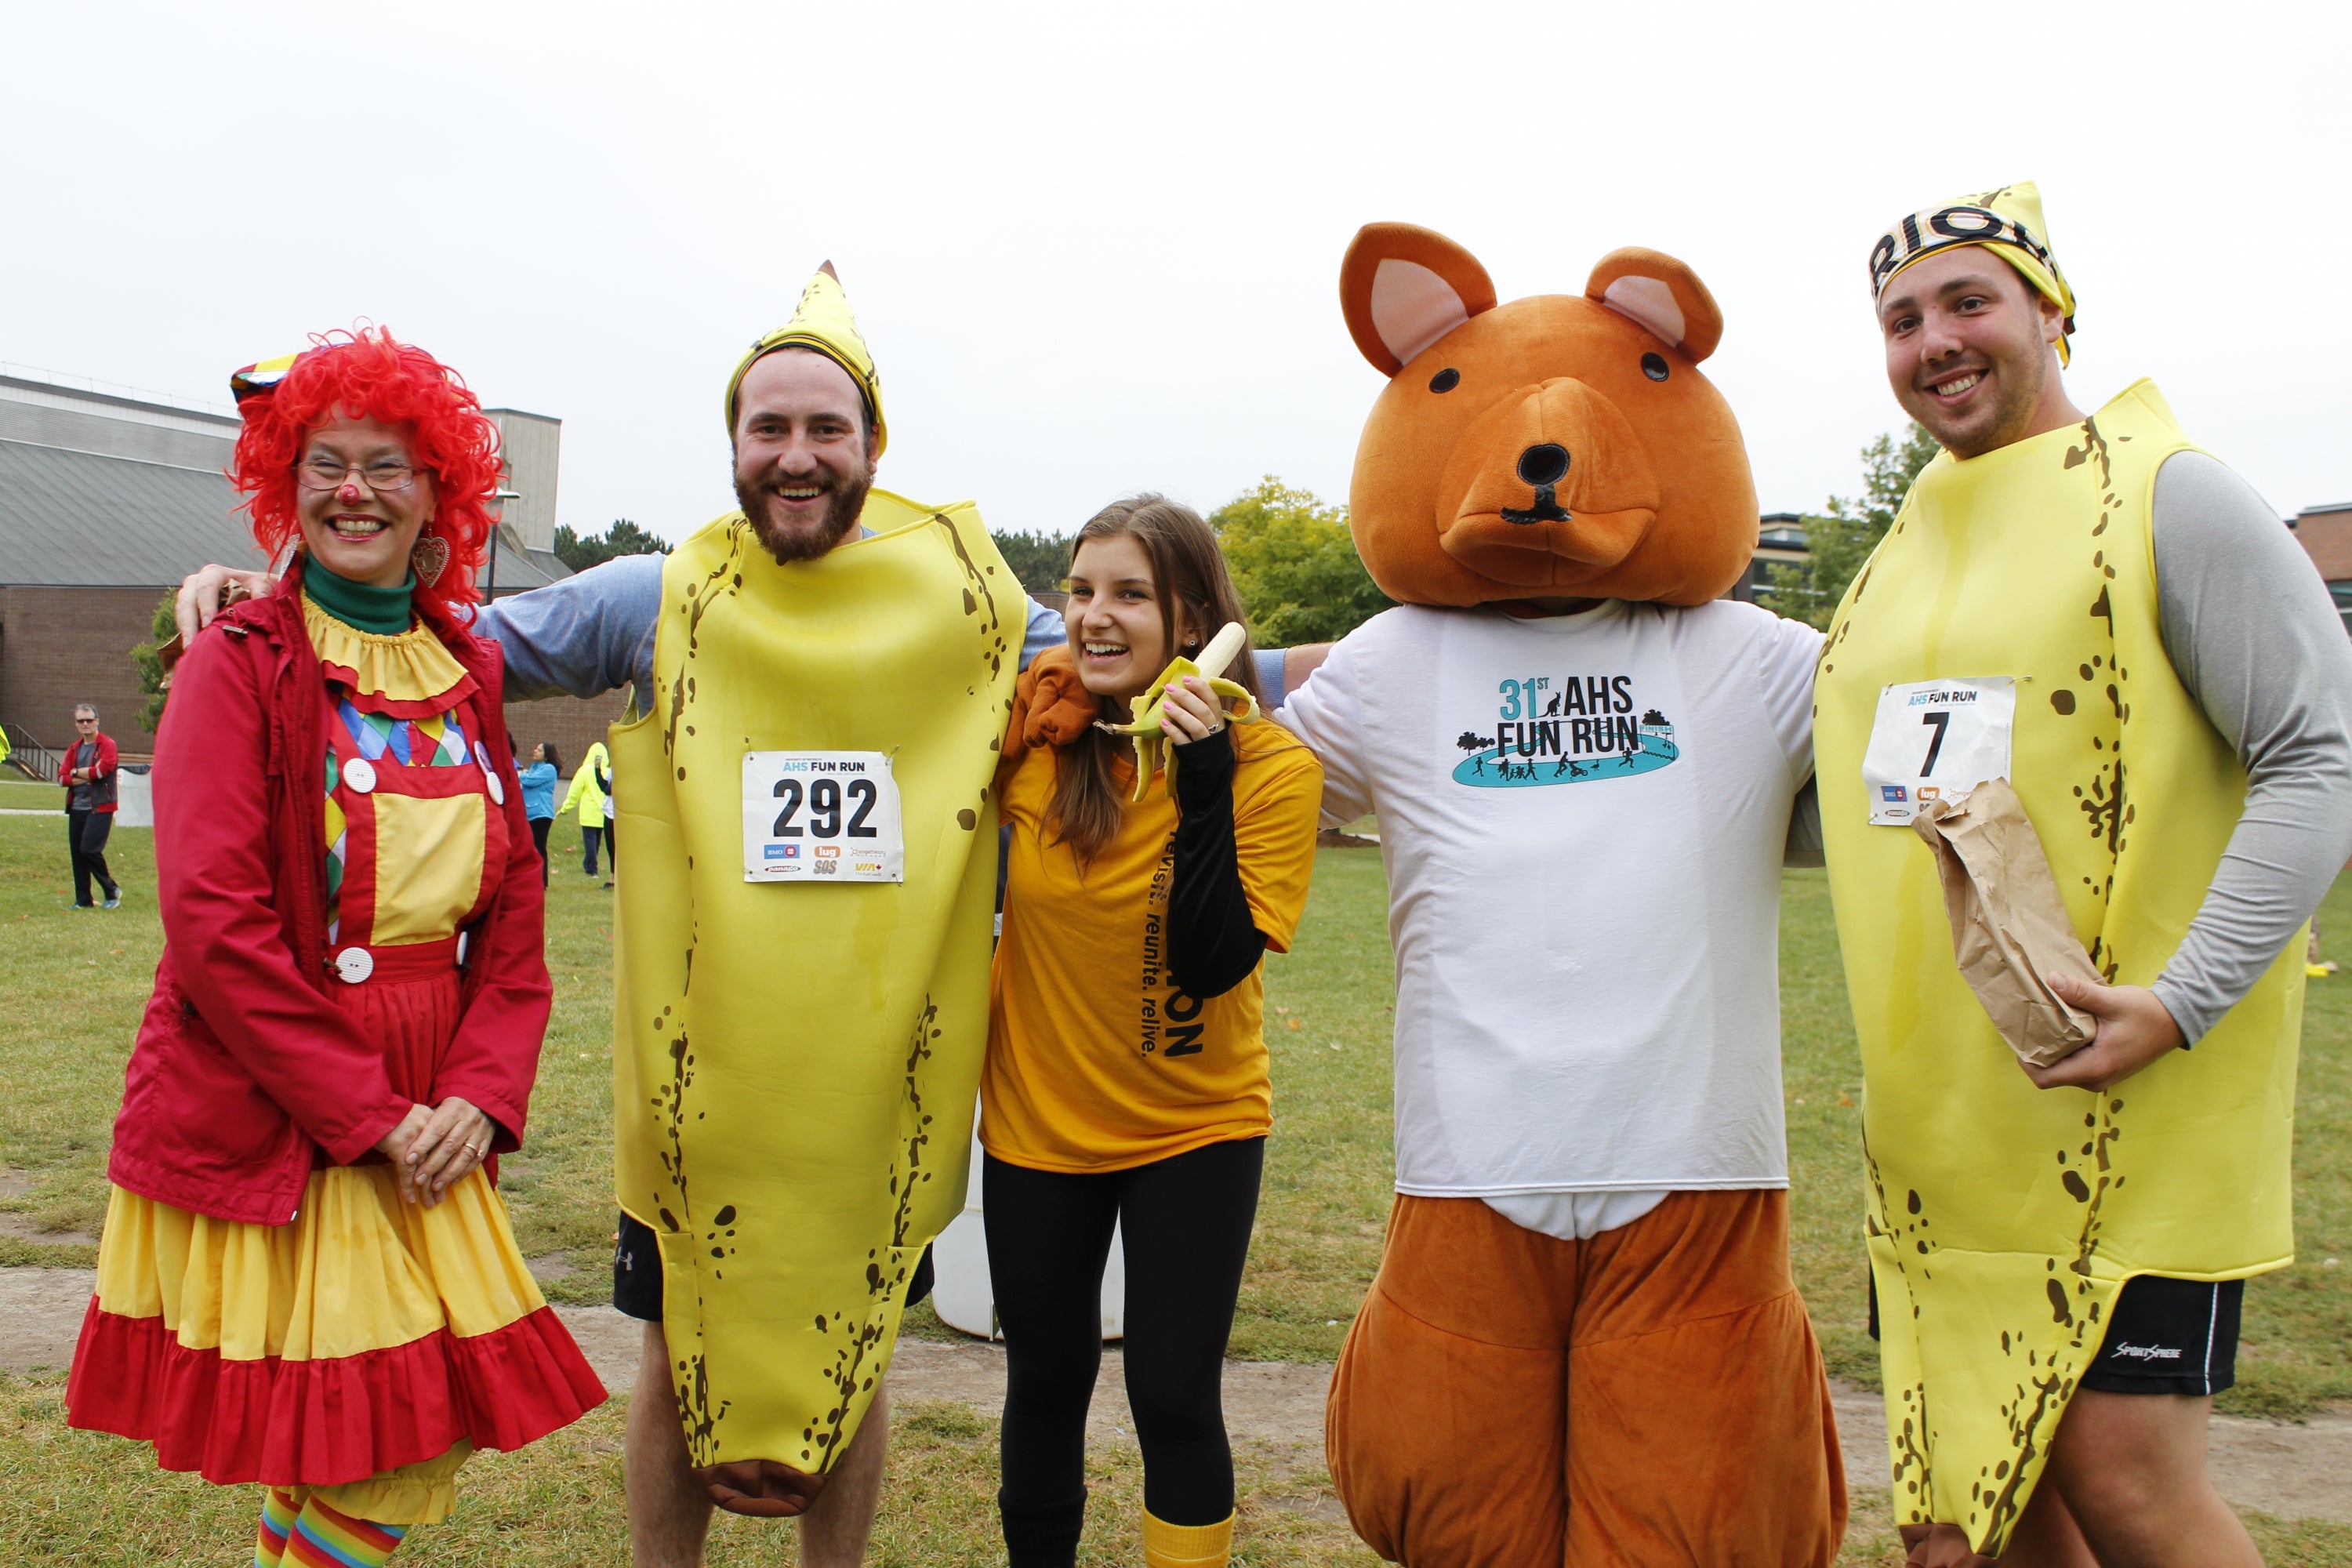 AHSSIE the mascot and participants dressed in costumes